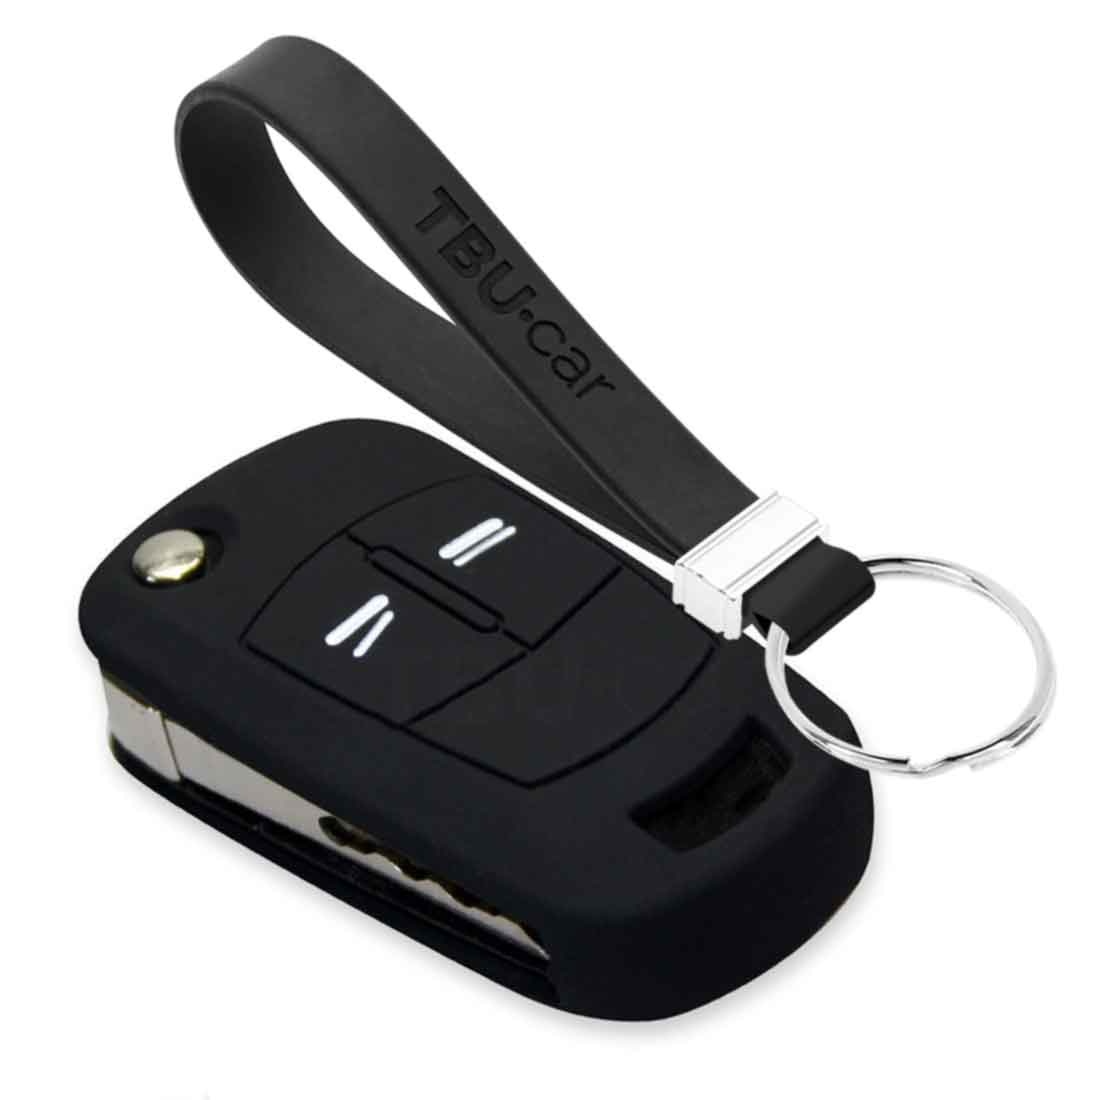 TBU car TBU car Car key cover compatible with Vauxhall - Silicone Protective Remote Key Shell - FOB Case Cover - Black